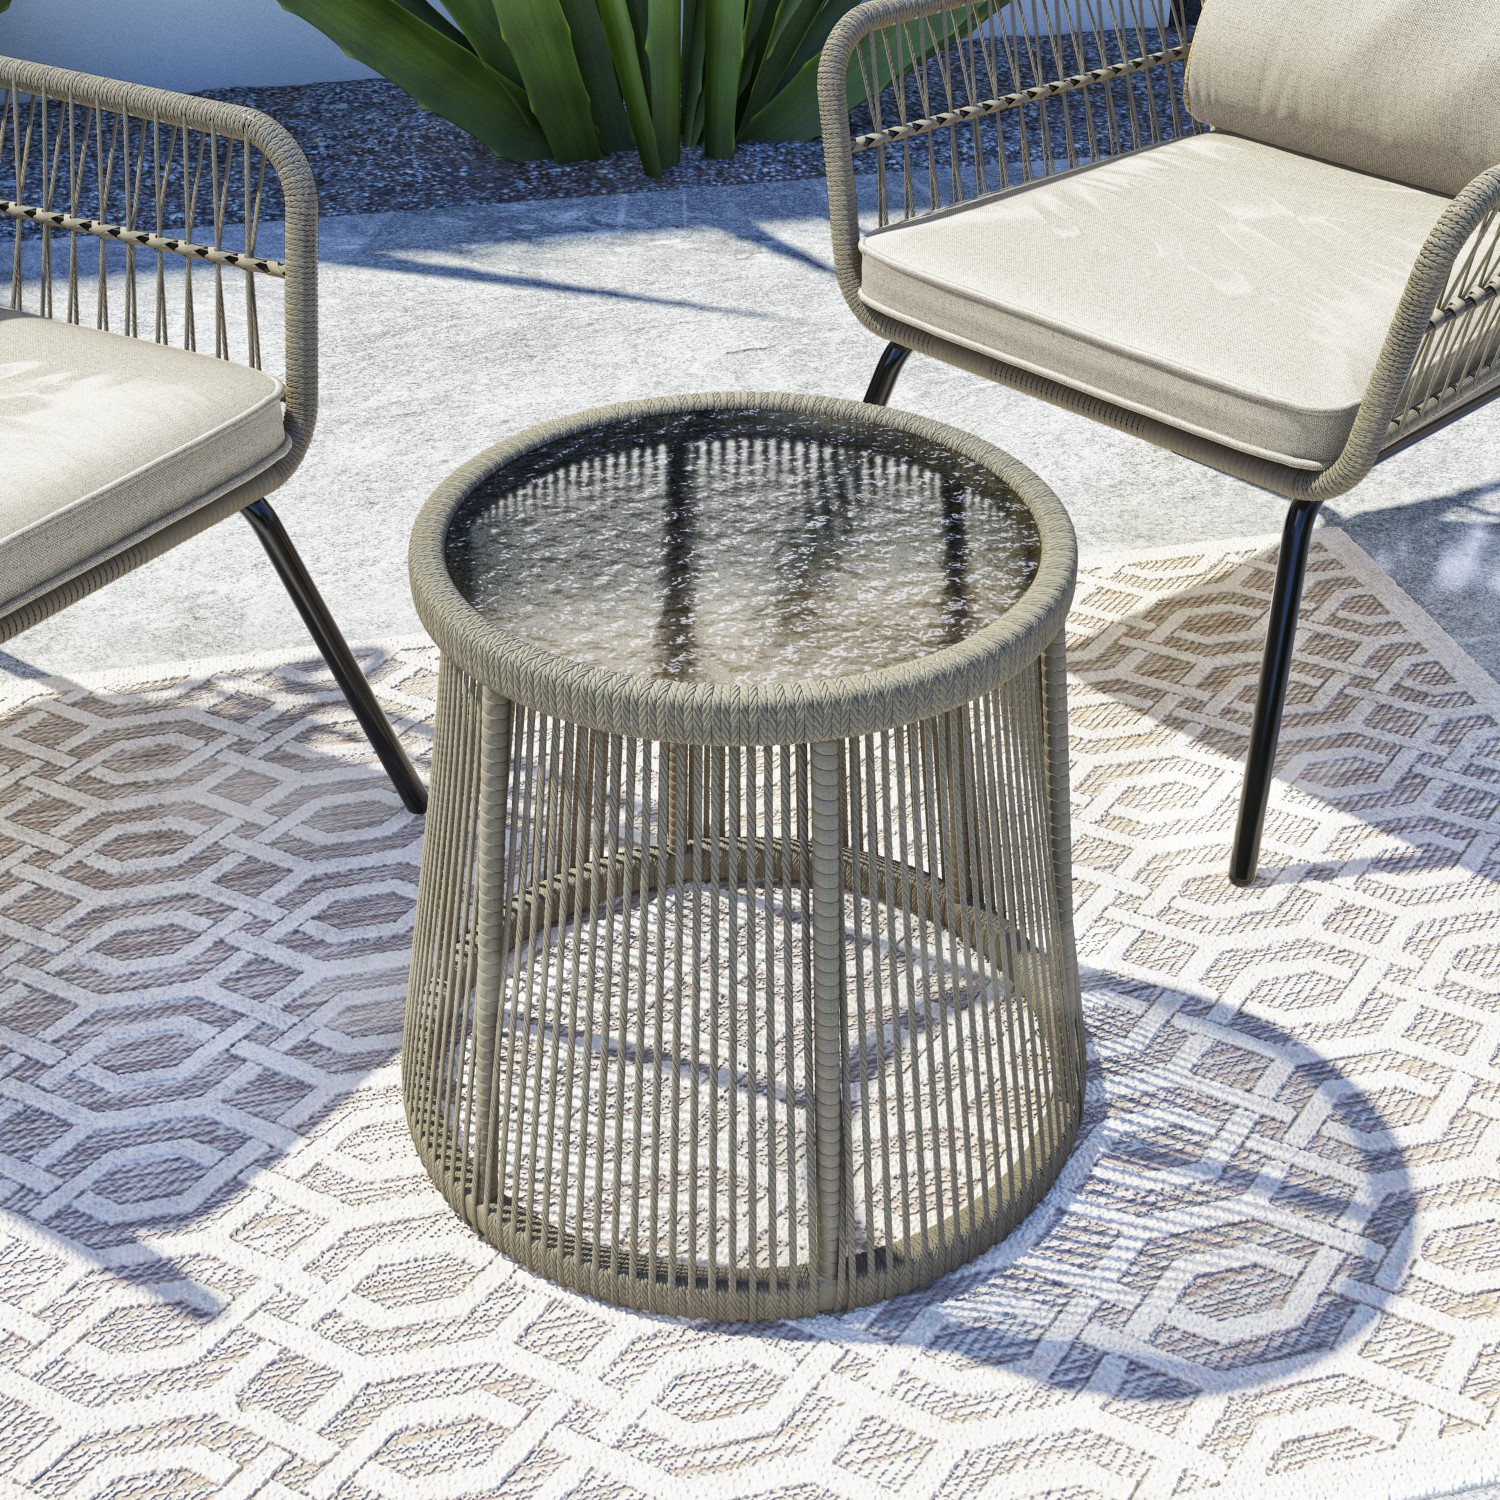 Read more about 2 seater garden woven rope effect bistro set natural como